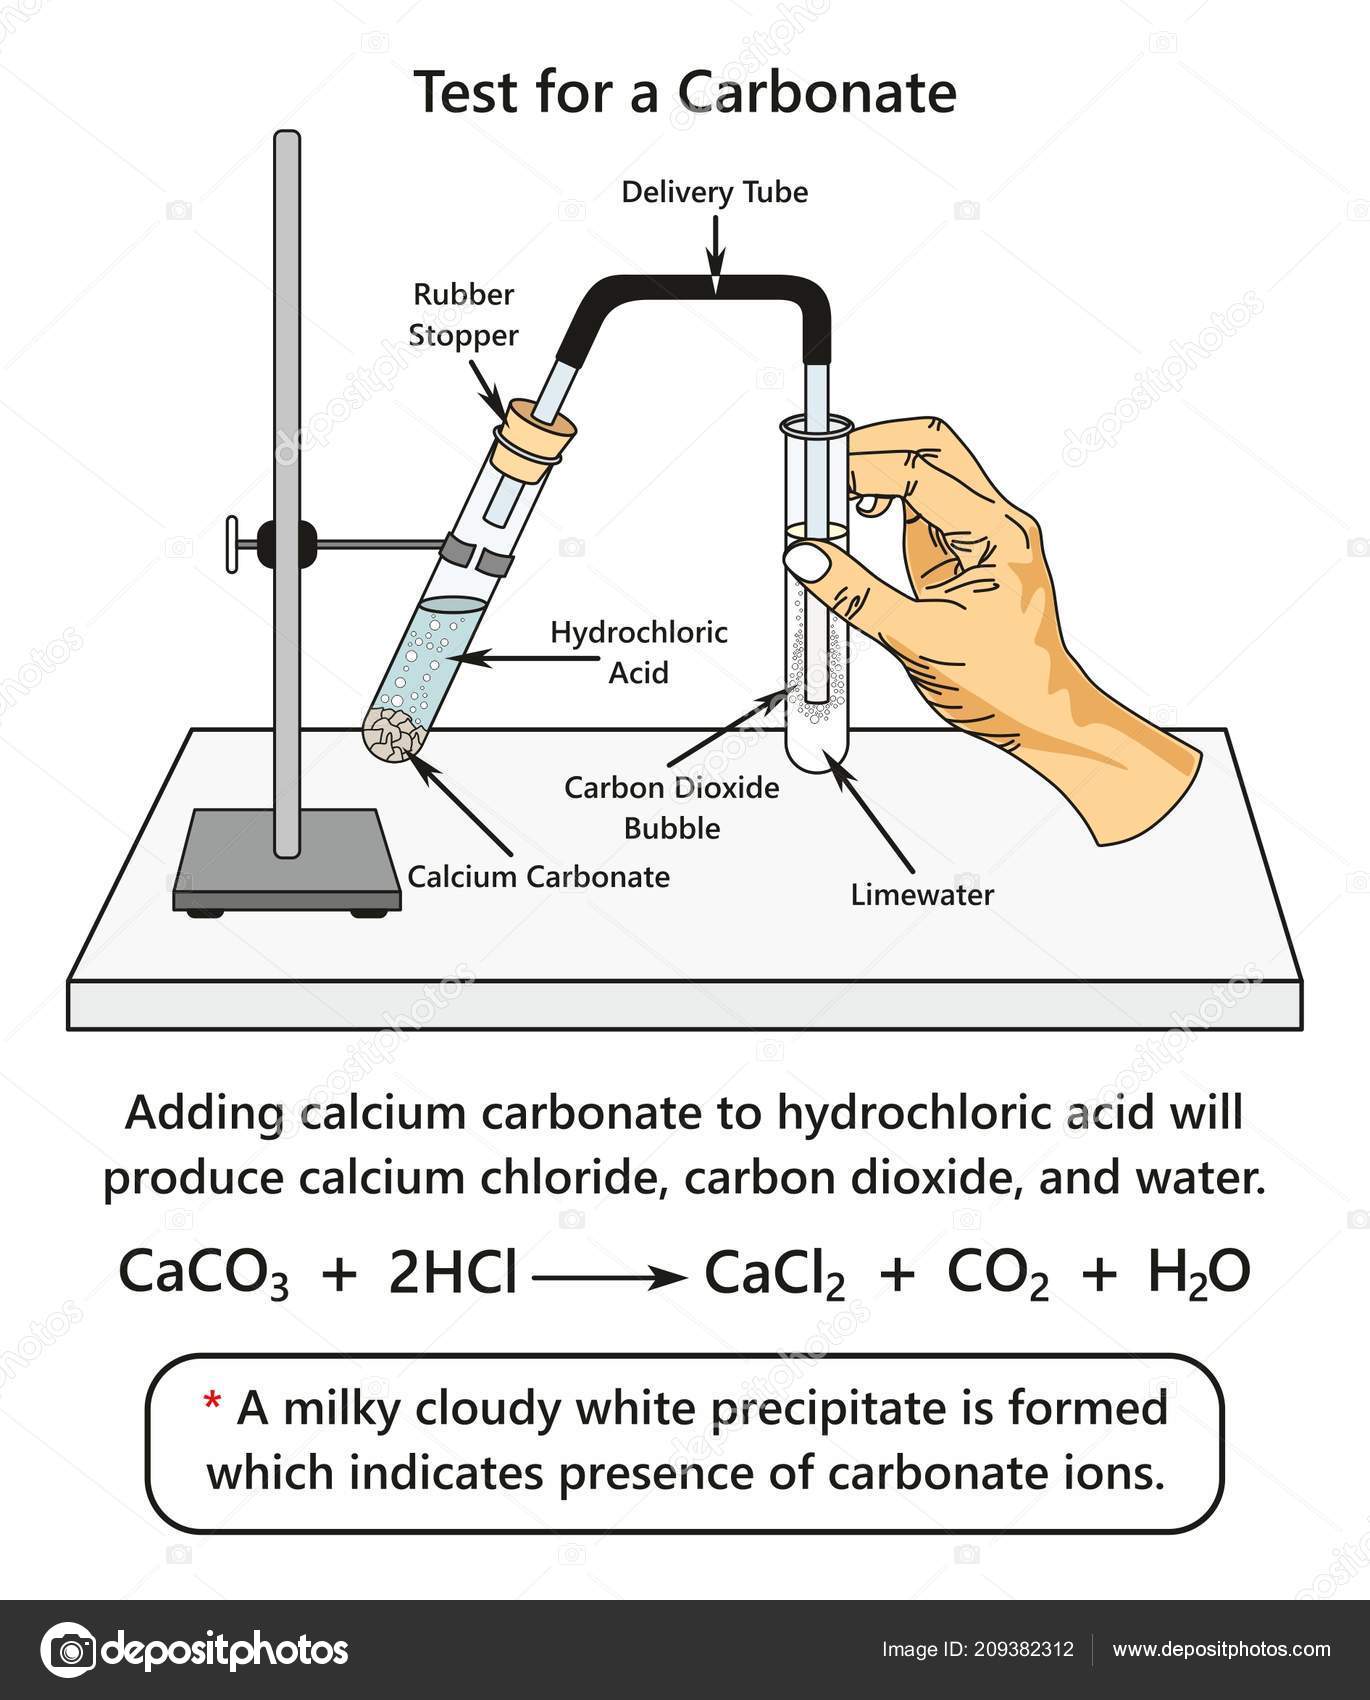 Test Carbonate Infographic Diagram Showing Laboratory ...